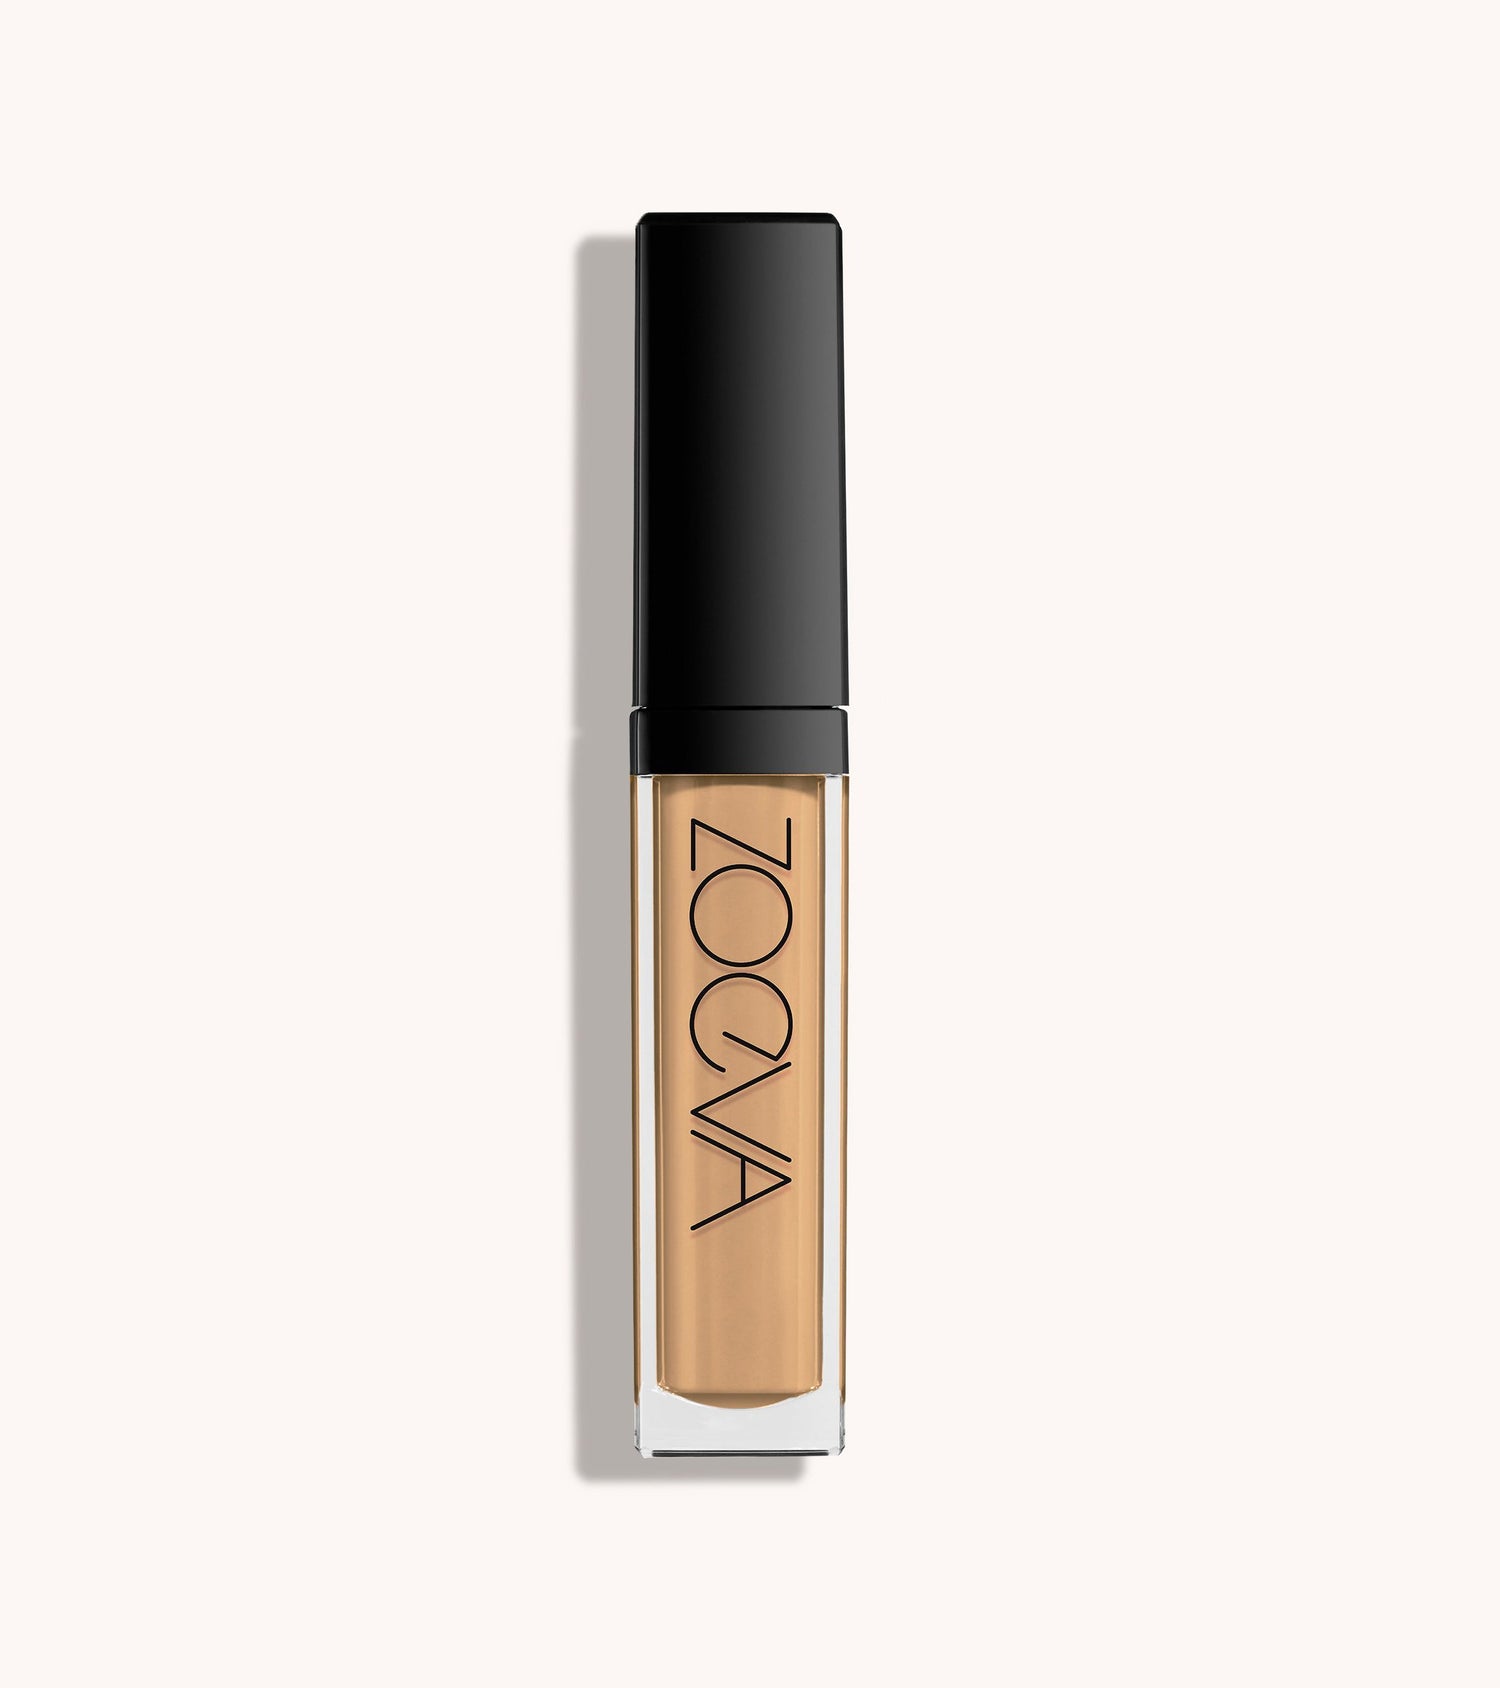 Authentik Skin Perfector Concealer (130 For Real) Main Image featured